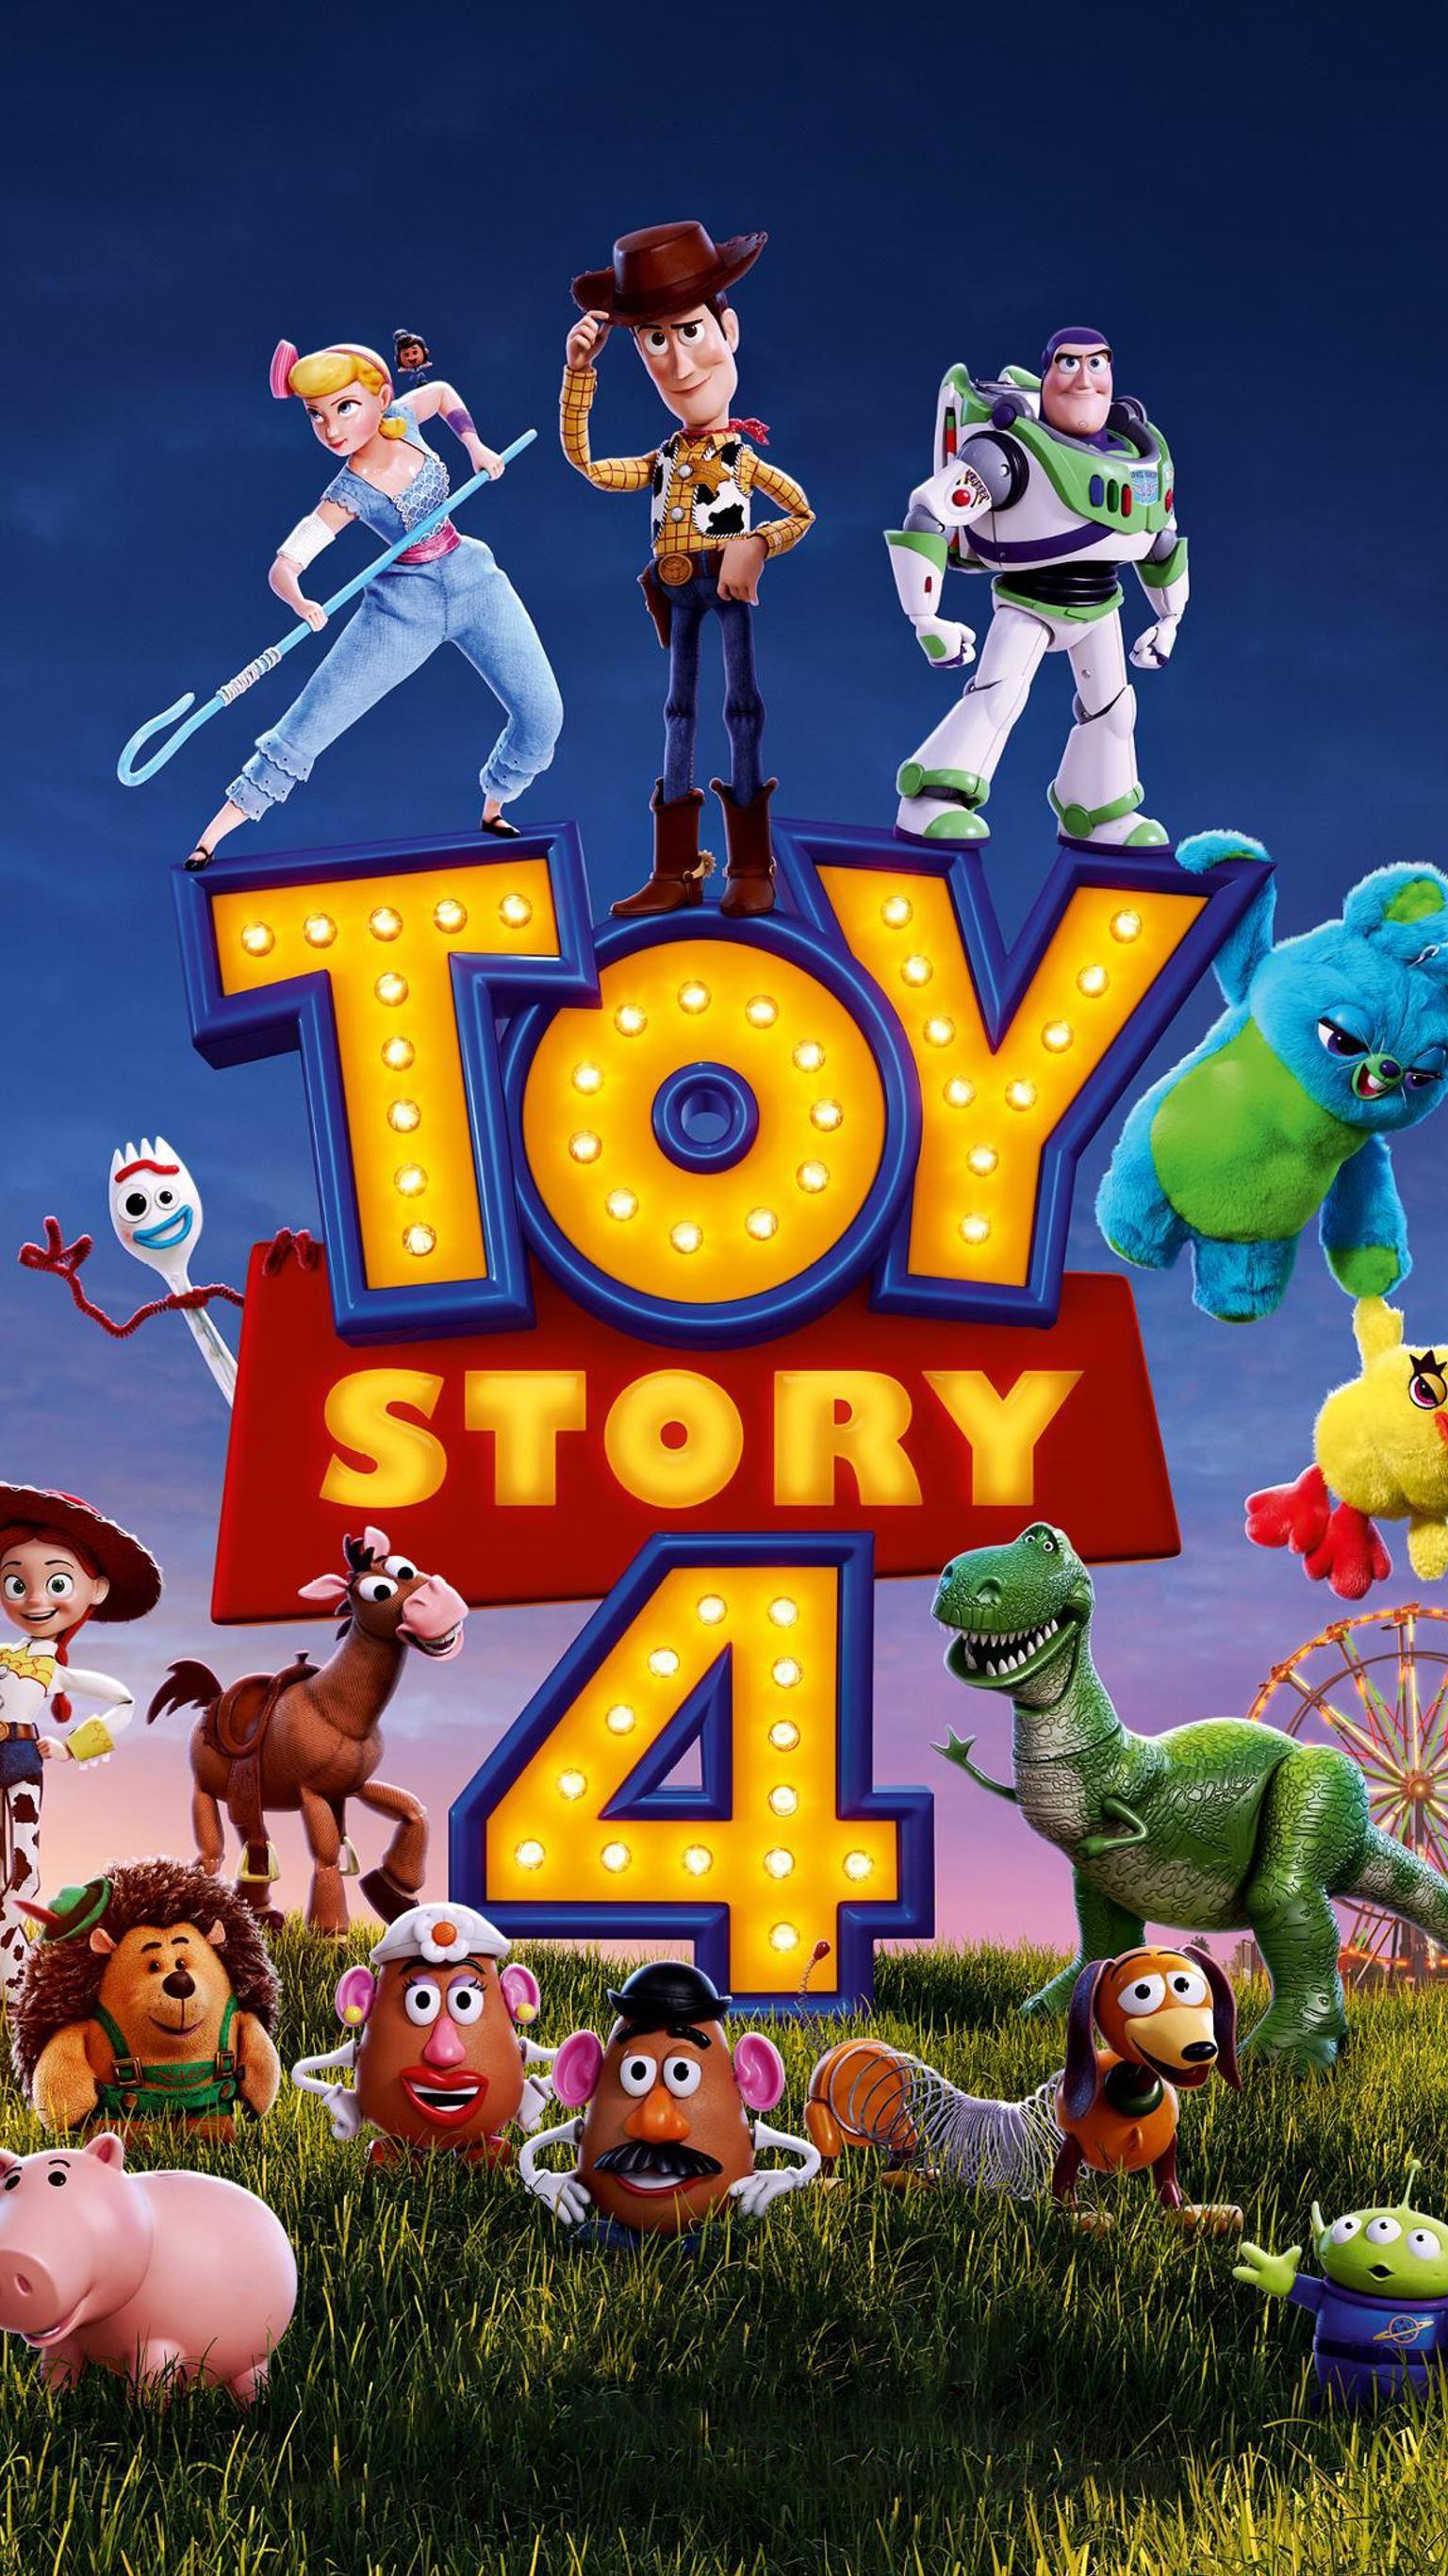 Toy Story 4 (2019) Phone Wallpaper. Phone Wallpaper. Movie